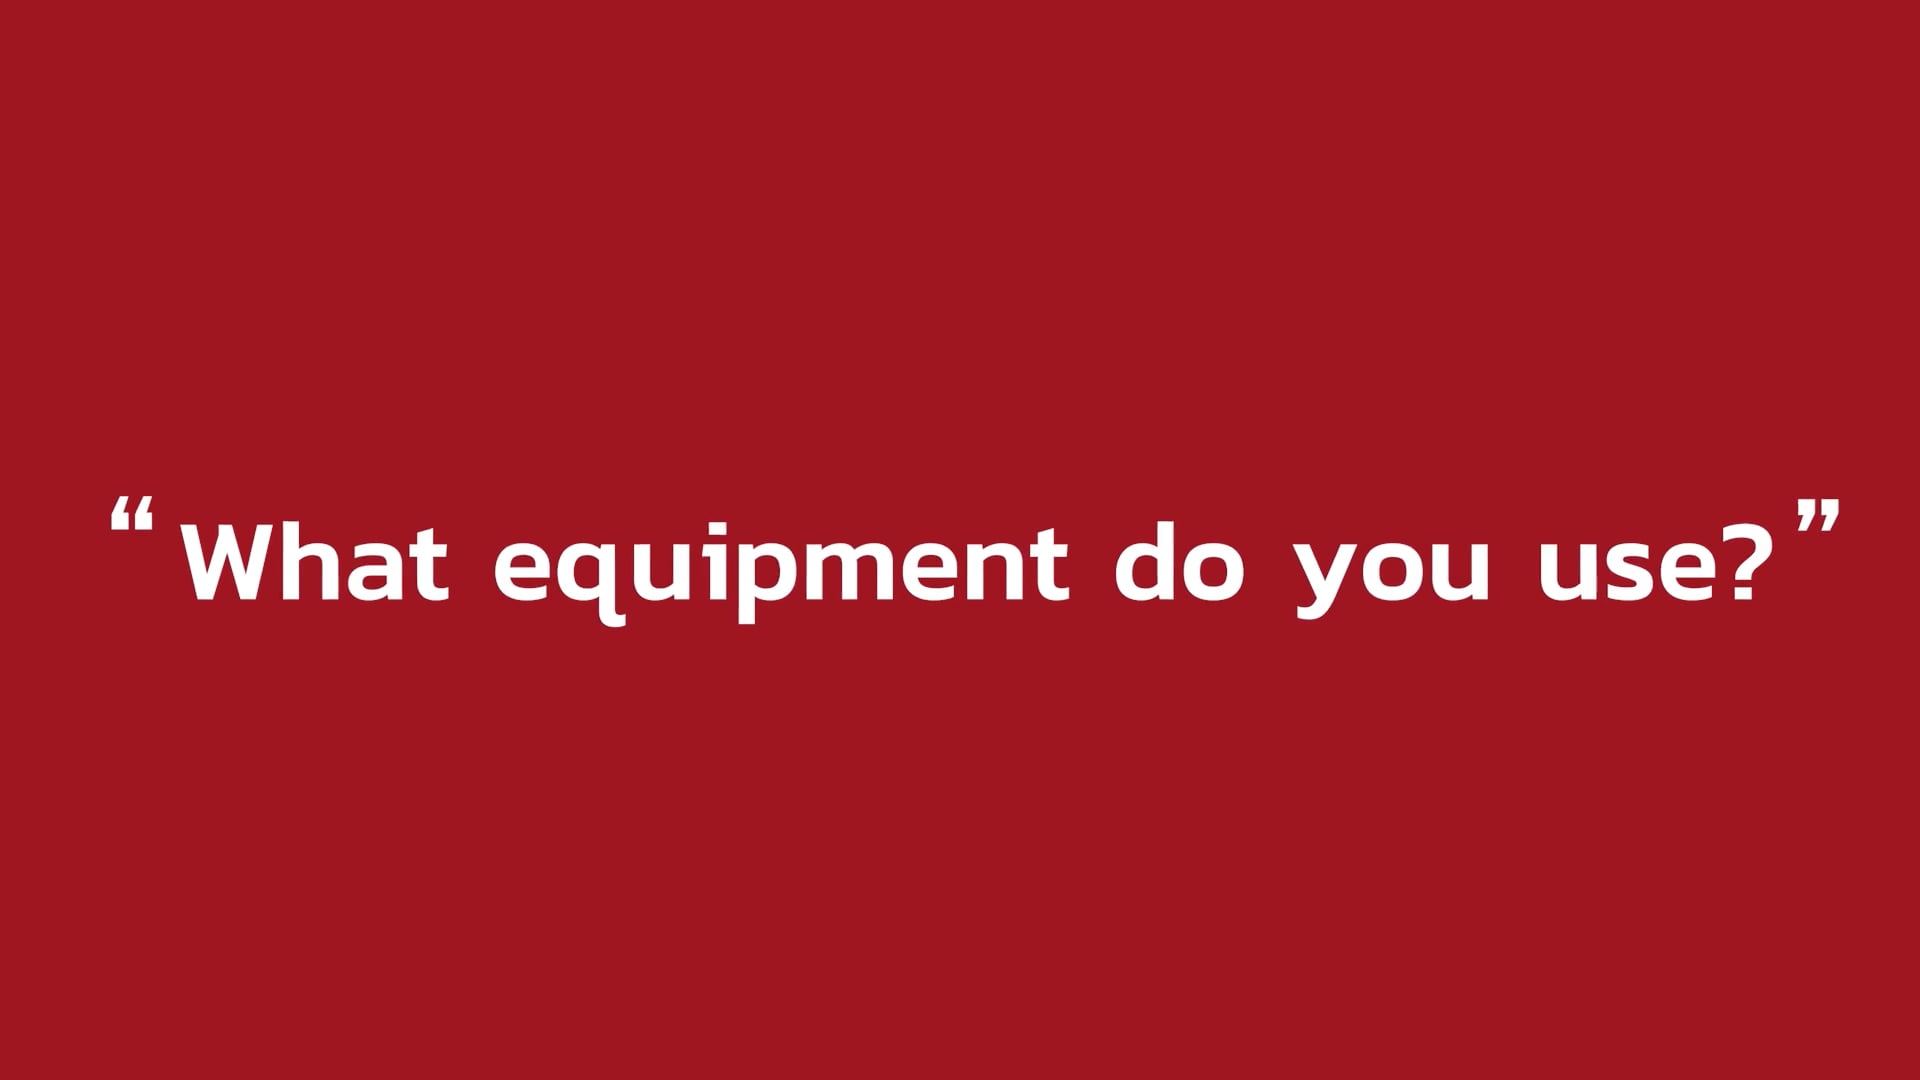 What equipment do you use?